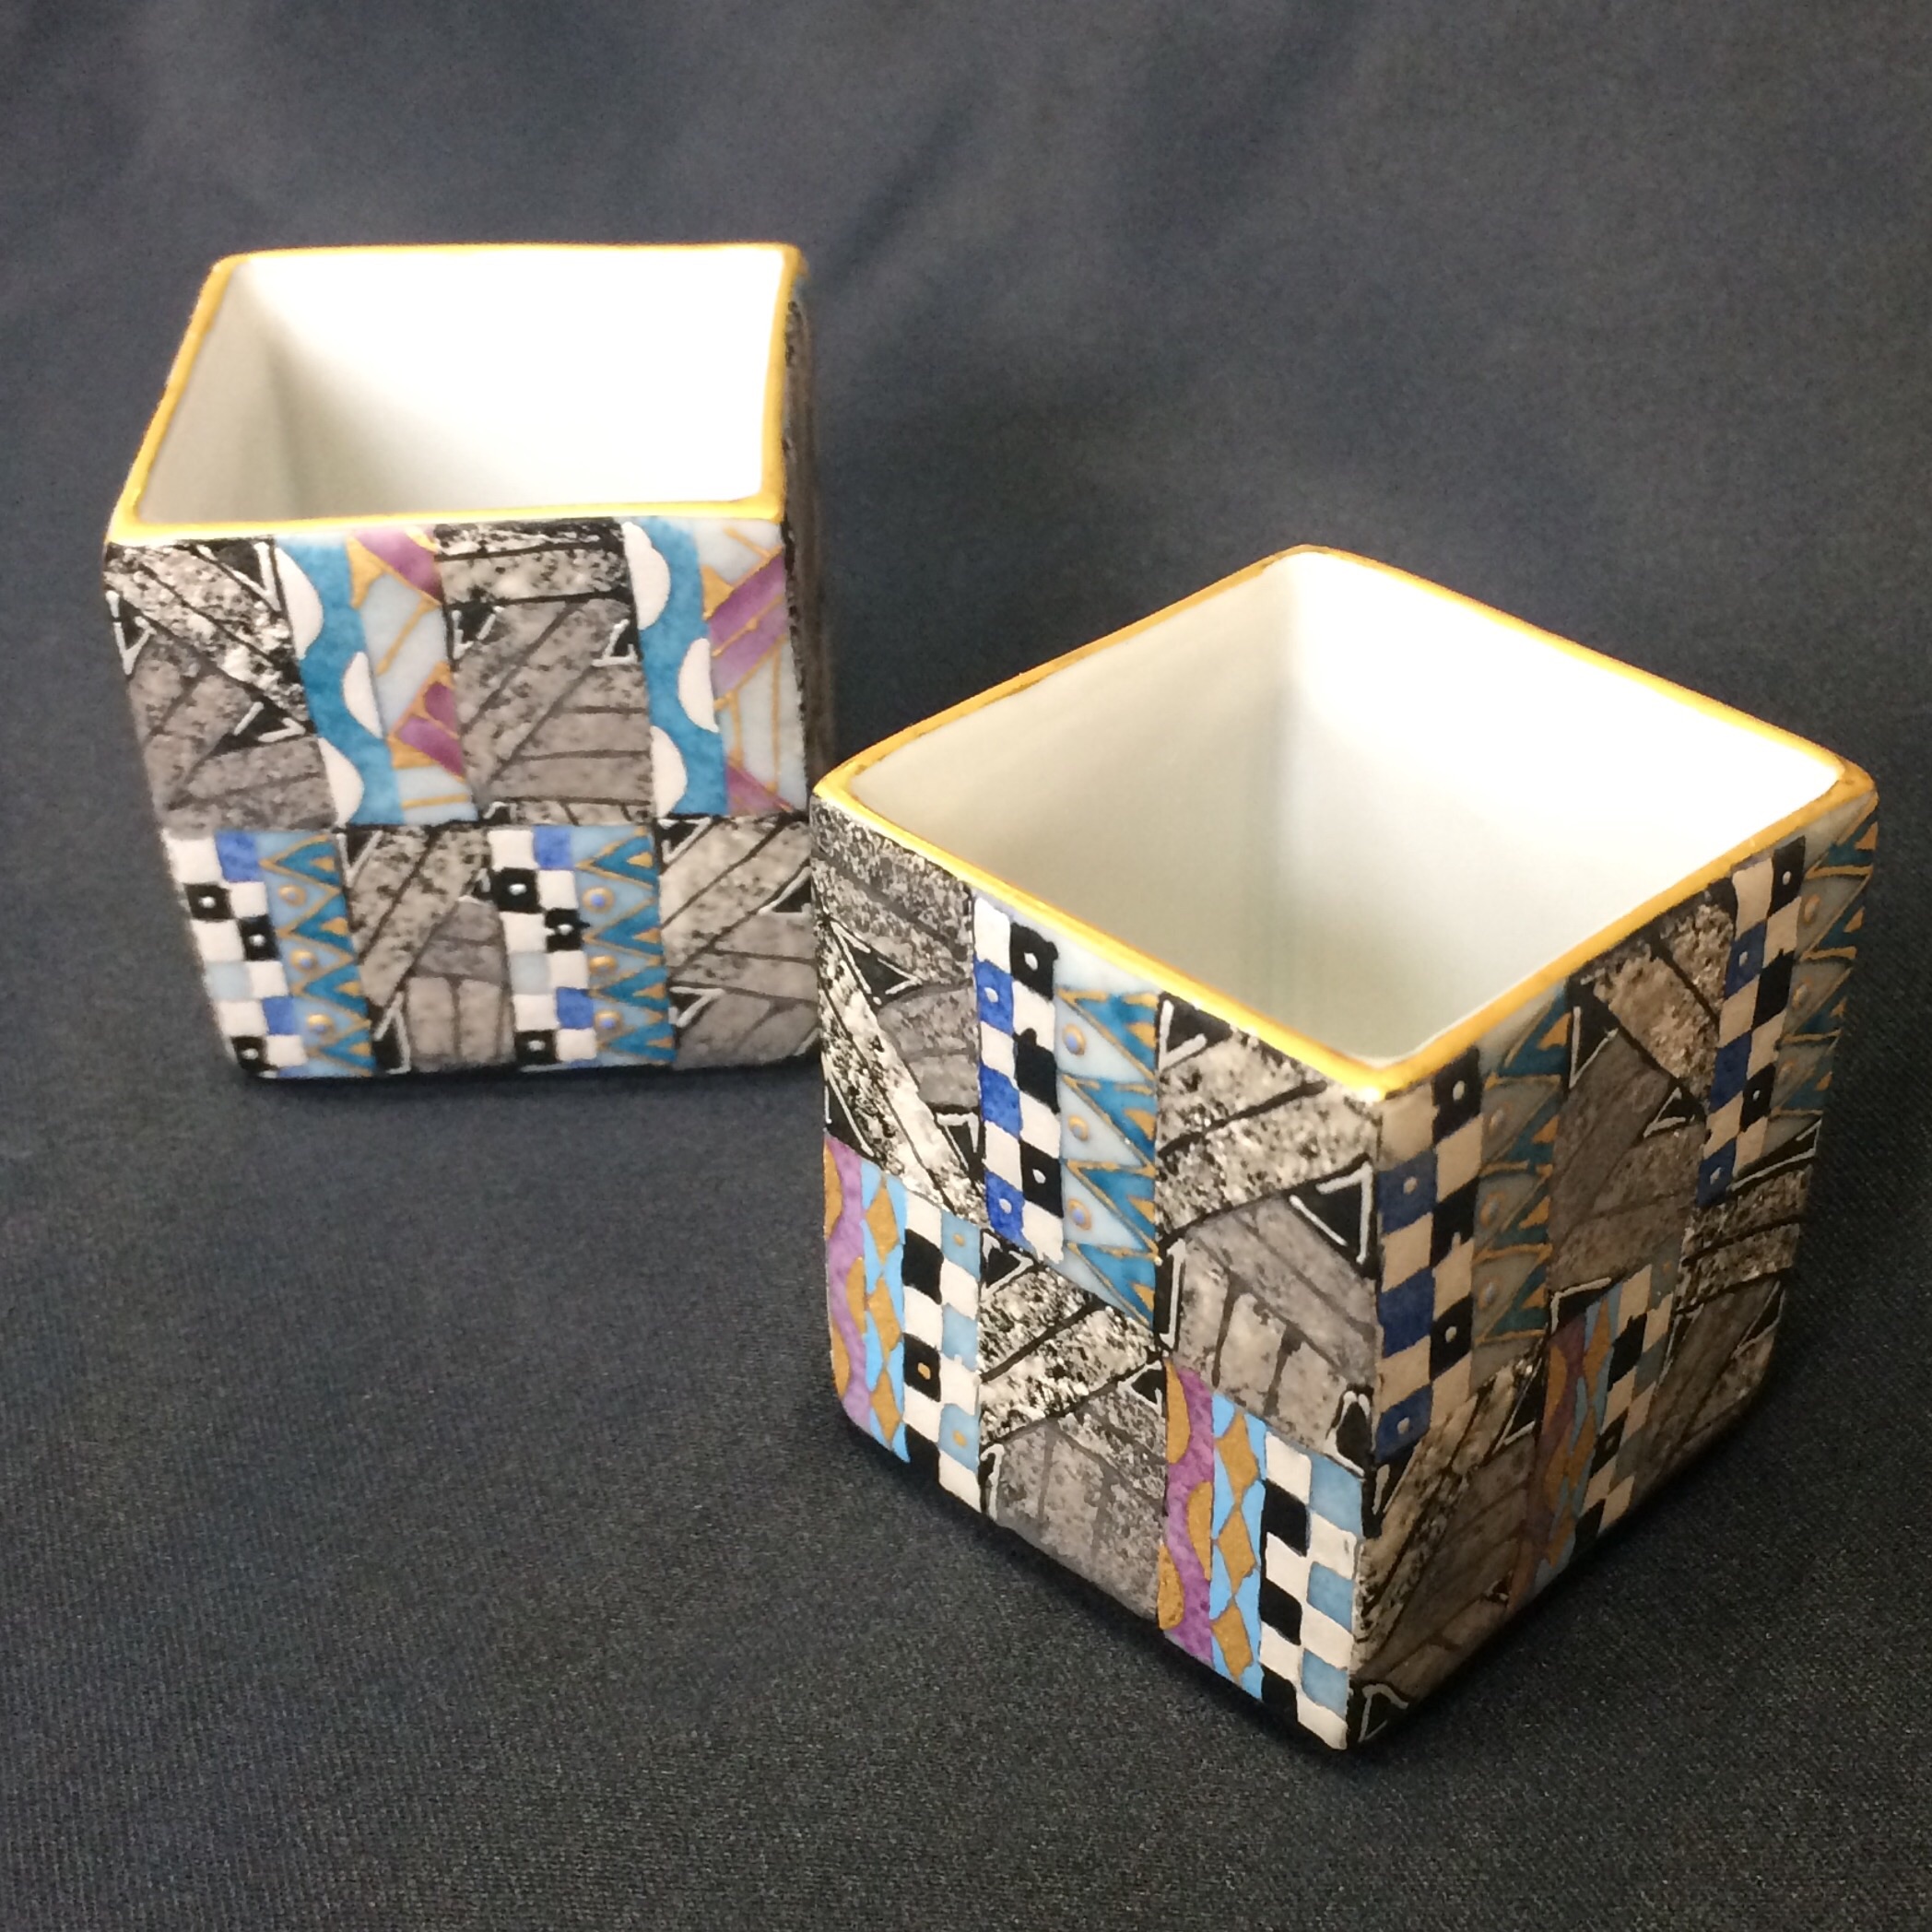 photo Square Sake Cups with Geometric Design in Gold and Silver Painting